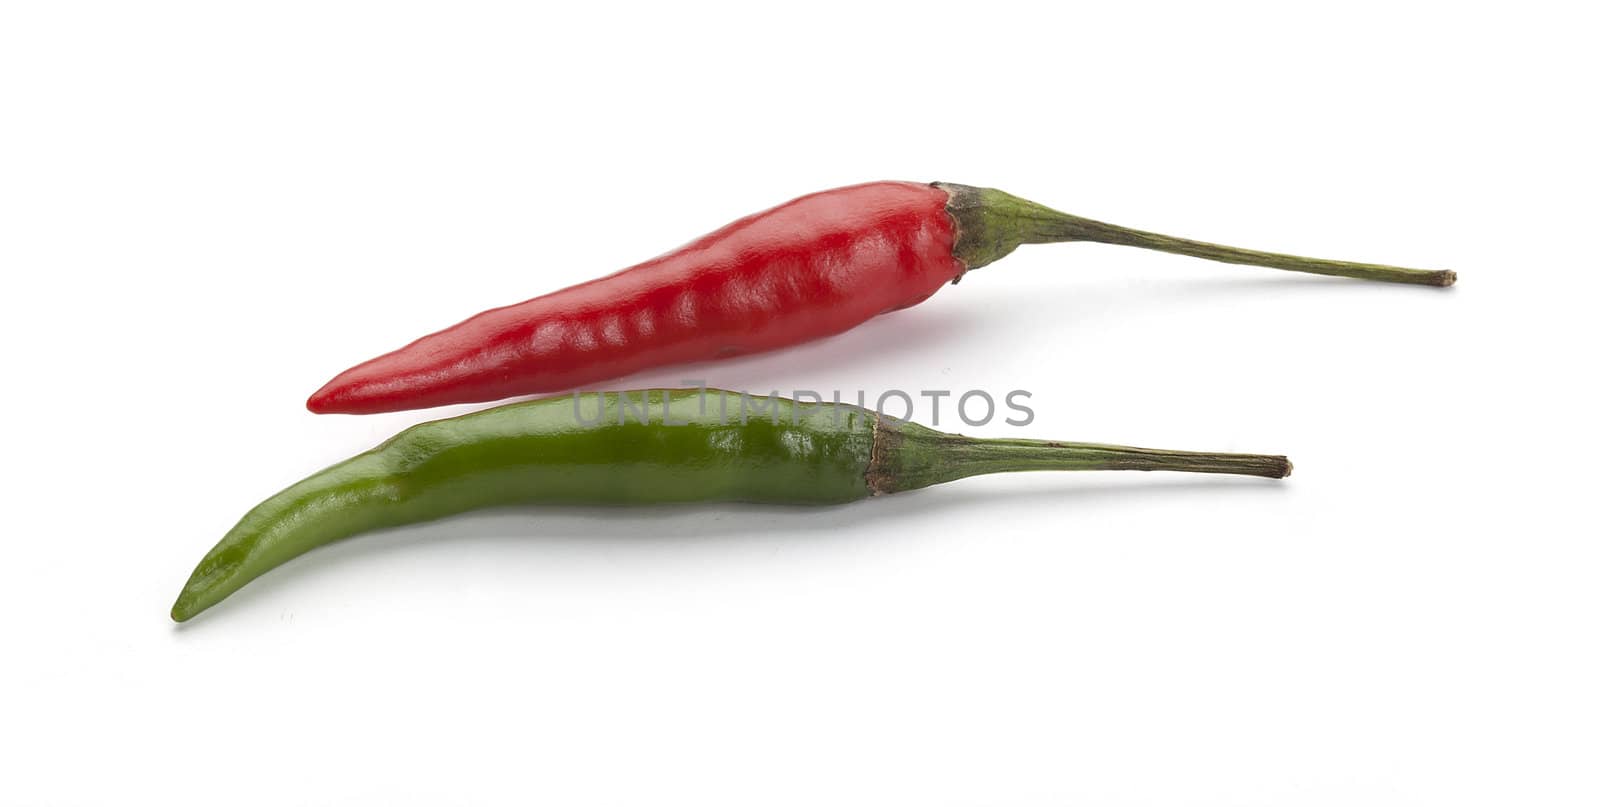 Chili peppers by Angorius